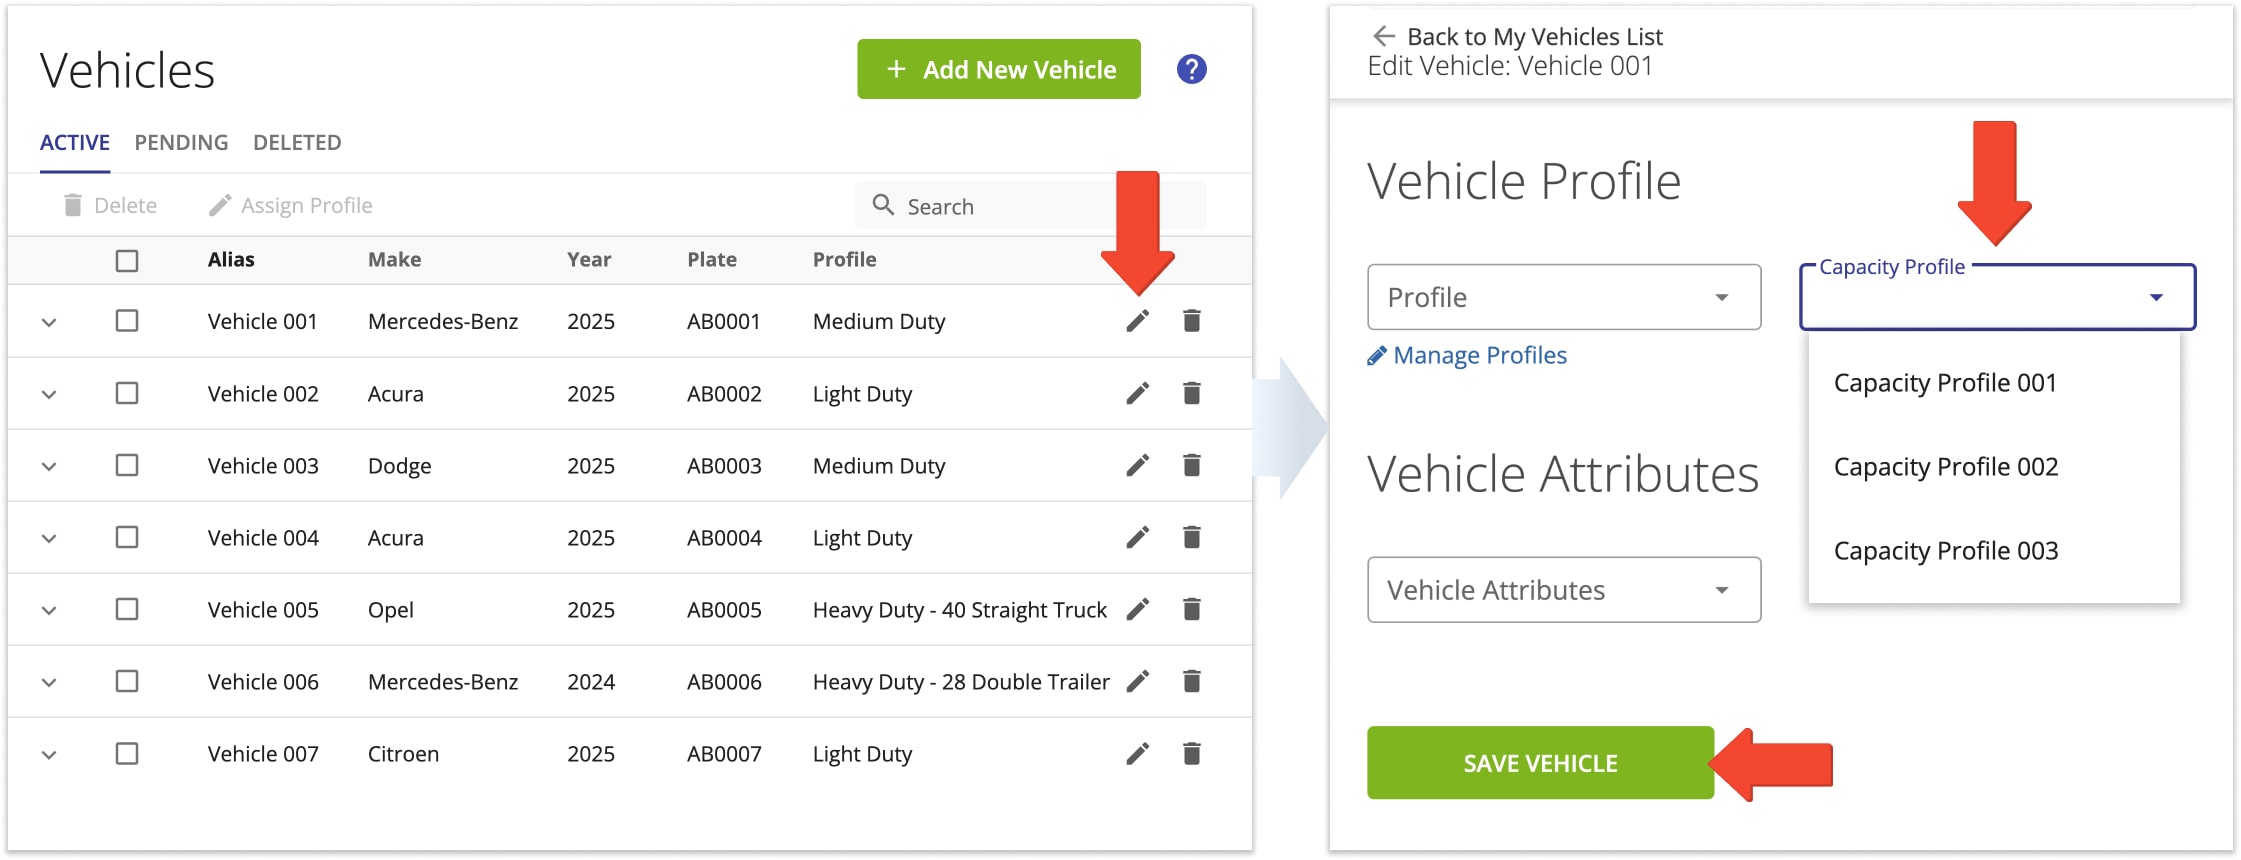 Add capacity profiles to fleet vehicles. Once you've added a Vehicle Capacity Profile to a vehicle, this vehicle automatically becomes available for Mixed Fleet Route Optimization.